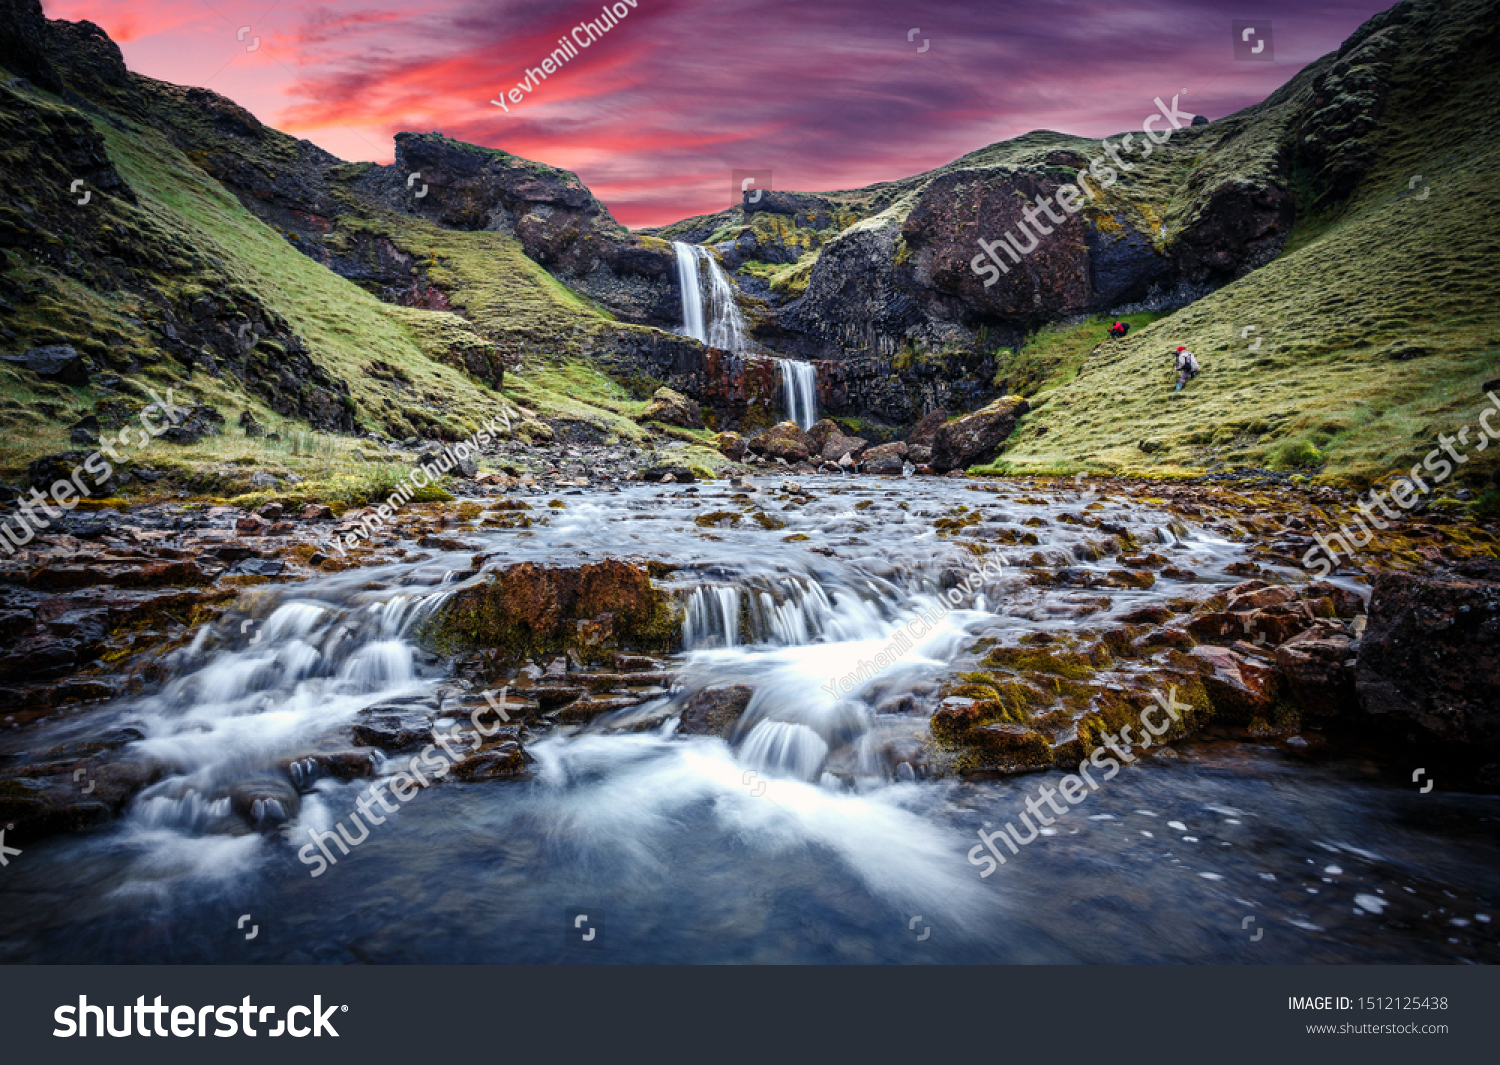 Wonderful nature of Iceland. fresh green grass and icelandic moss near river with waterfall. Typical Icelandic scenery during sunset.  Picture of wild area. Dramatic Scene with colorful sky #1512125438